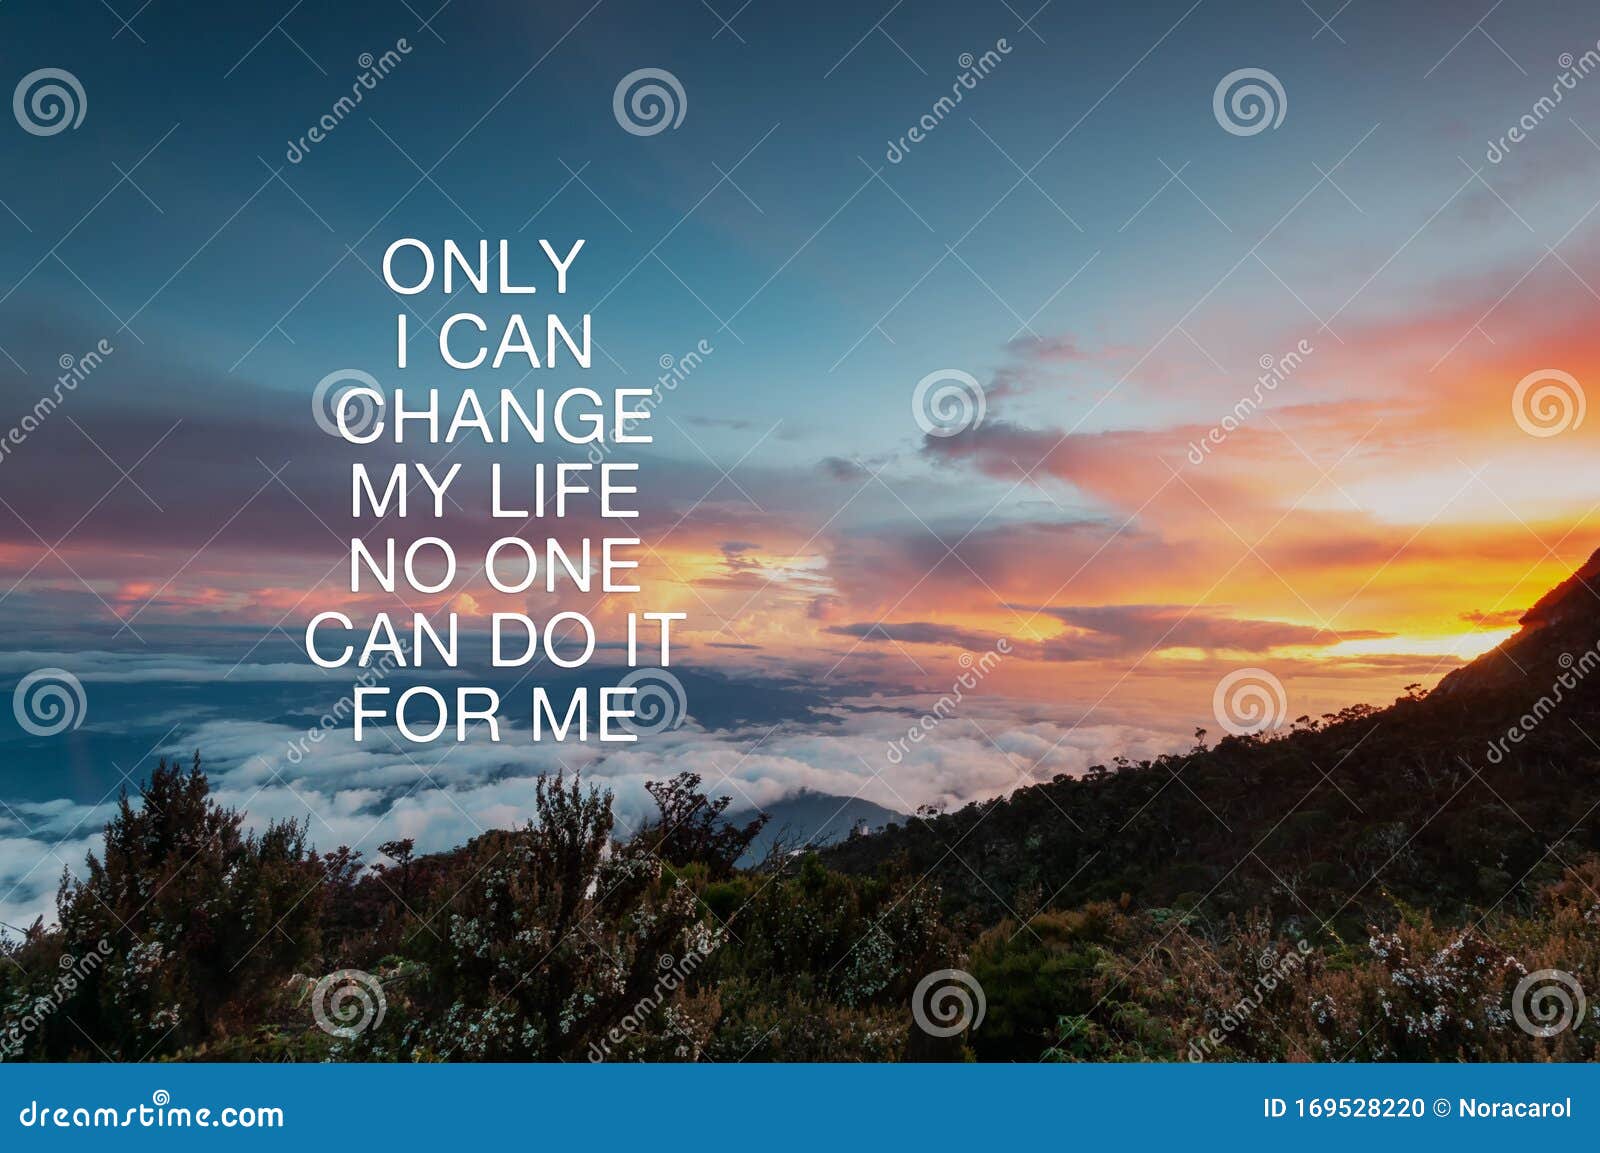 Inspirational Quotes - only I Can Change My Life No One Can Do it for Me.  Blurry Nature Background Stock Photo - Image of motivating, background:  169528220